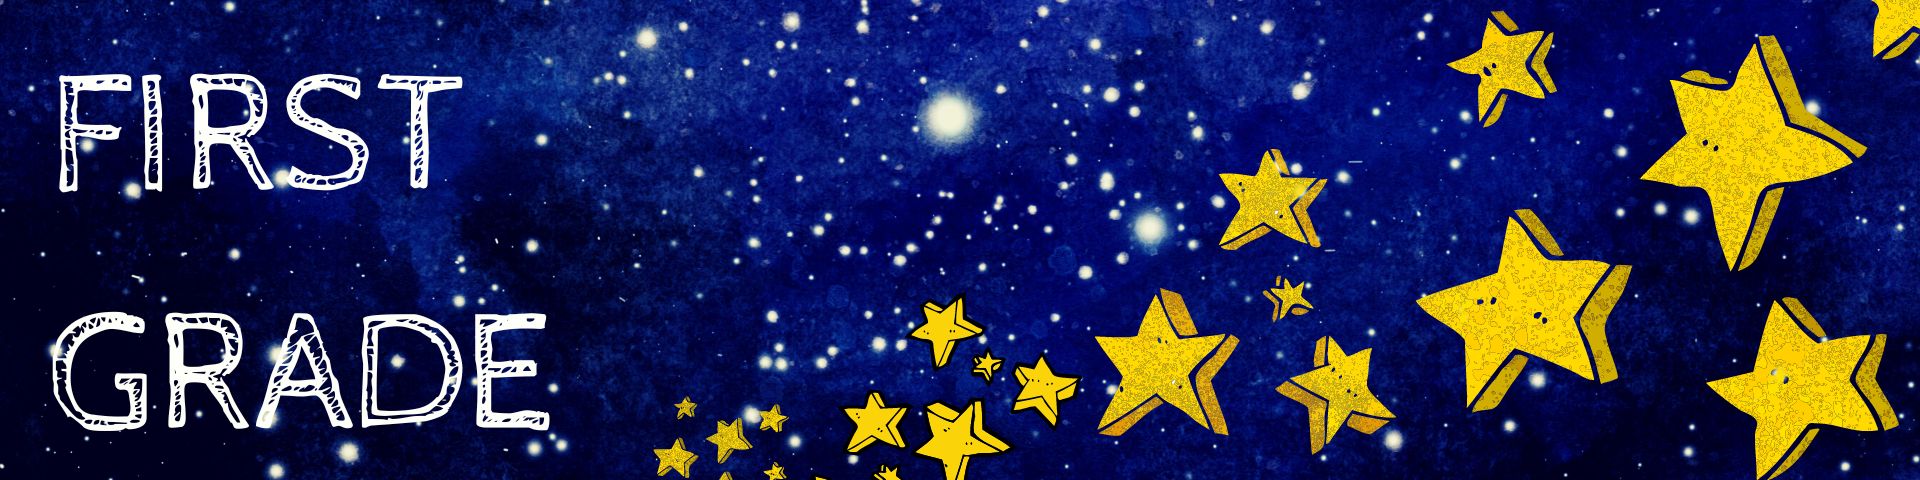 1st grade with stars and night sky background